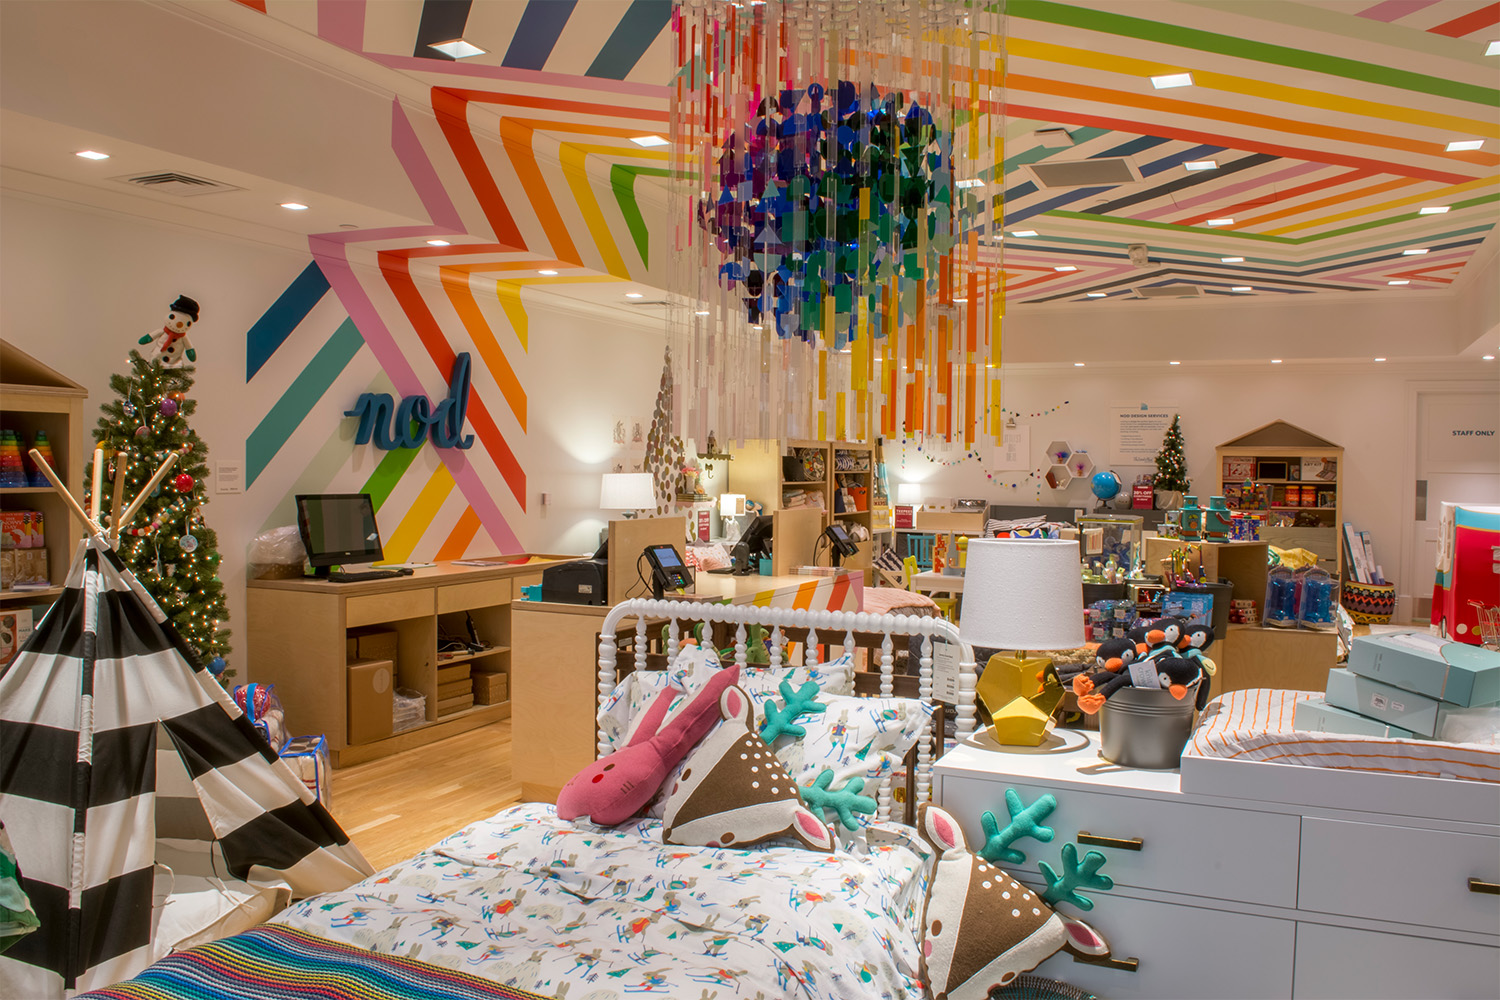 Store merchandise, and a large colorful chandelier hanging from trendy painted ceiling